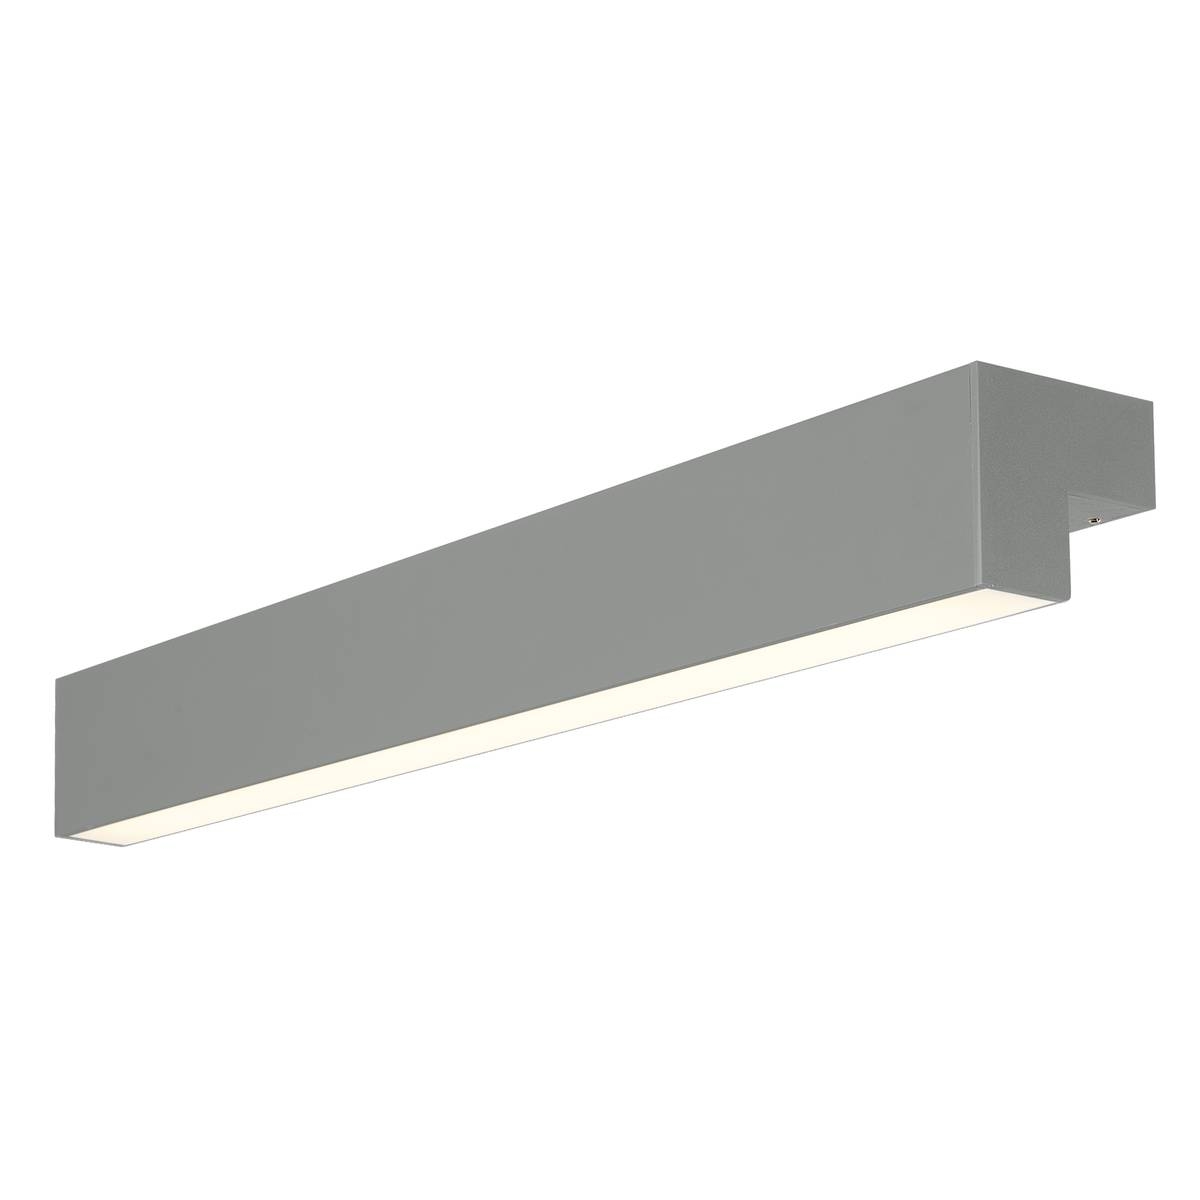 SLV L-LINE 60 LED, wall and ceiling light, IP44, 3000K, 700lm, mouse grey 1001301